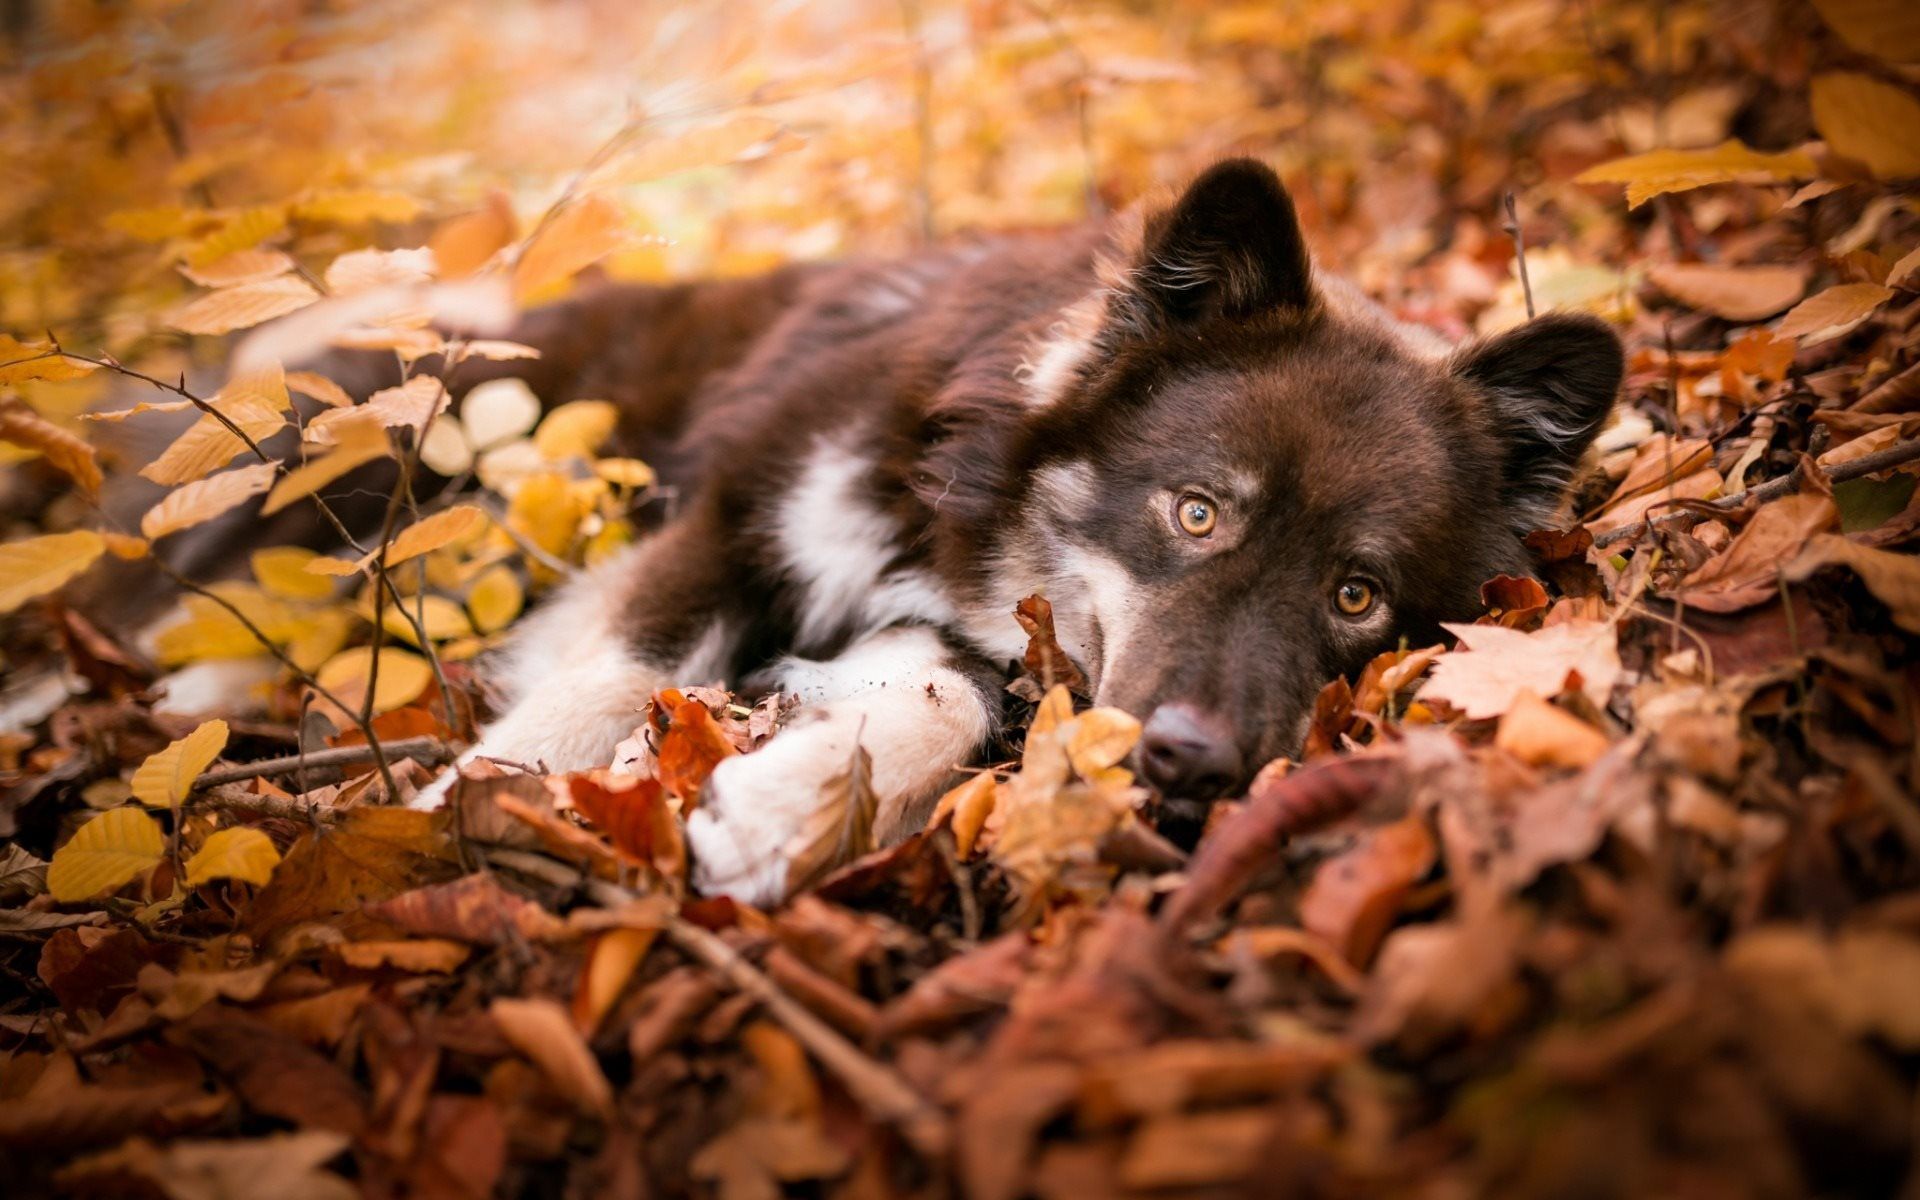 Download wallpaper German Shepherd, little puppy, autumn, yellow dry leaves, cute animals, small dogs, pets for desktop with resolution 1920x1200. High Quality HD picture wallpaper